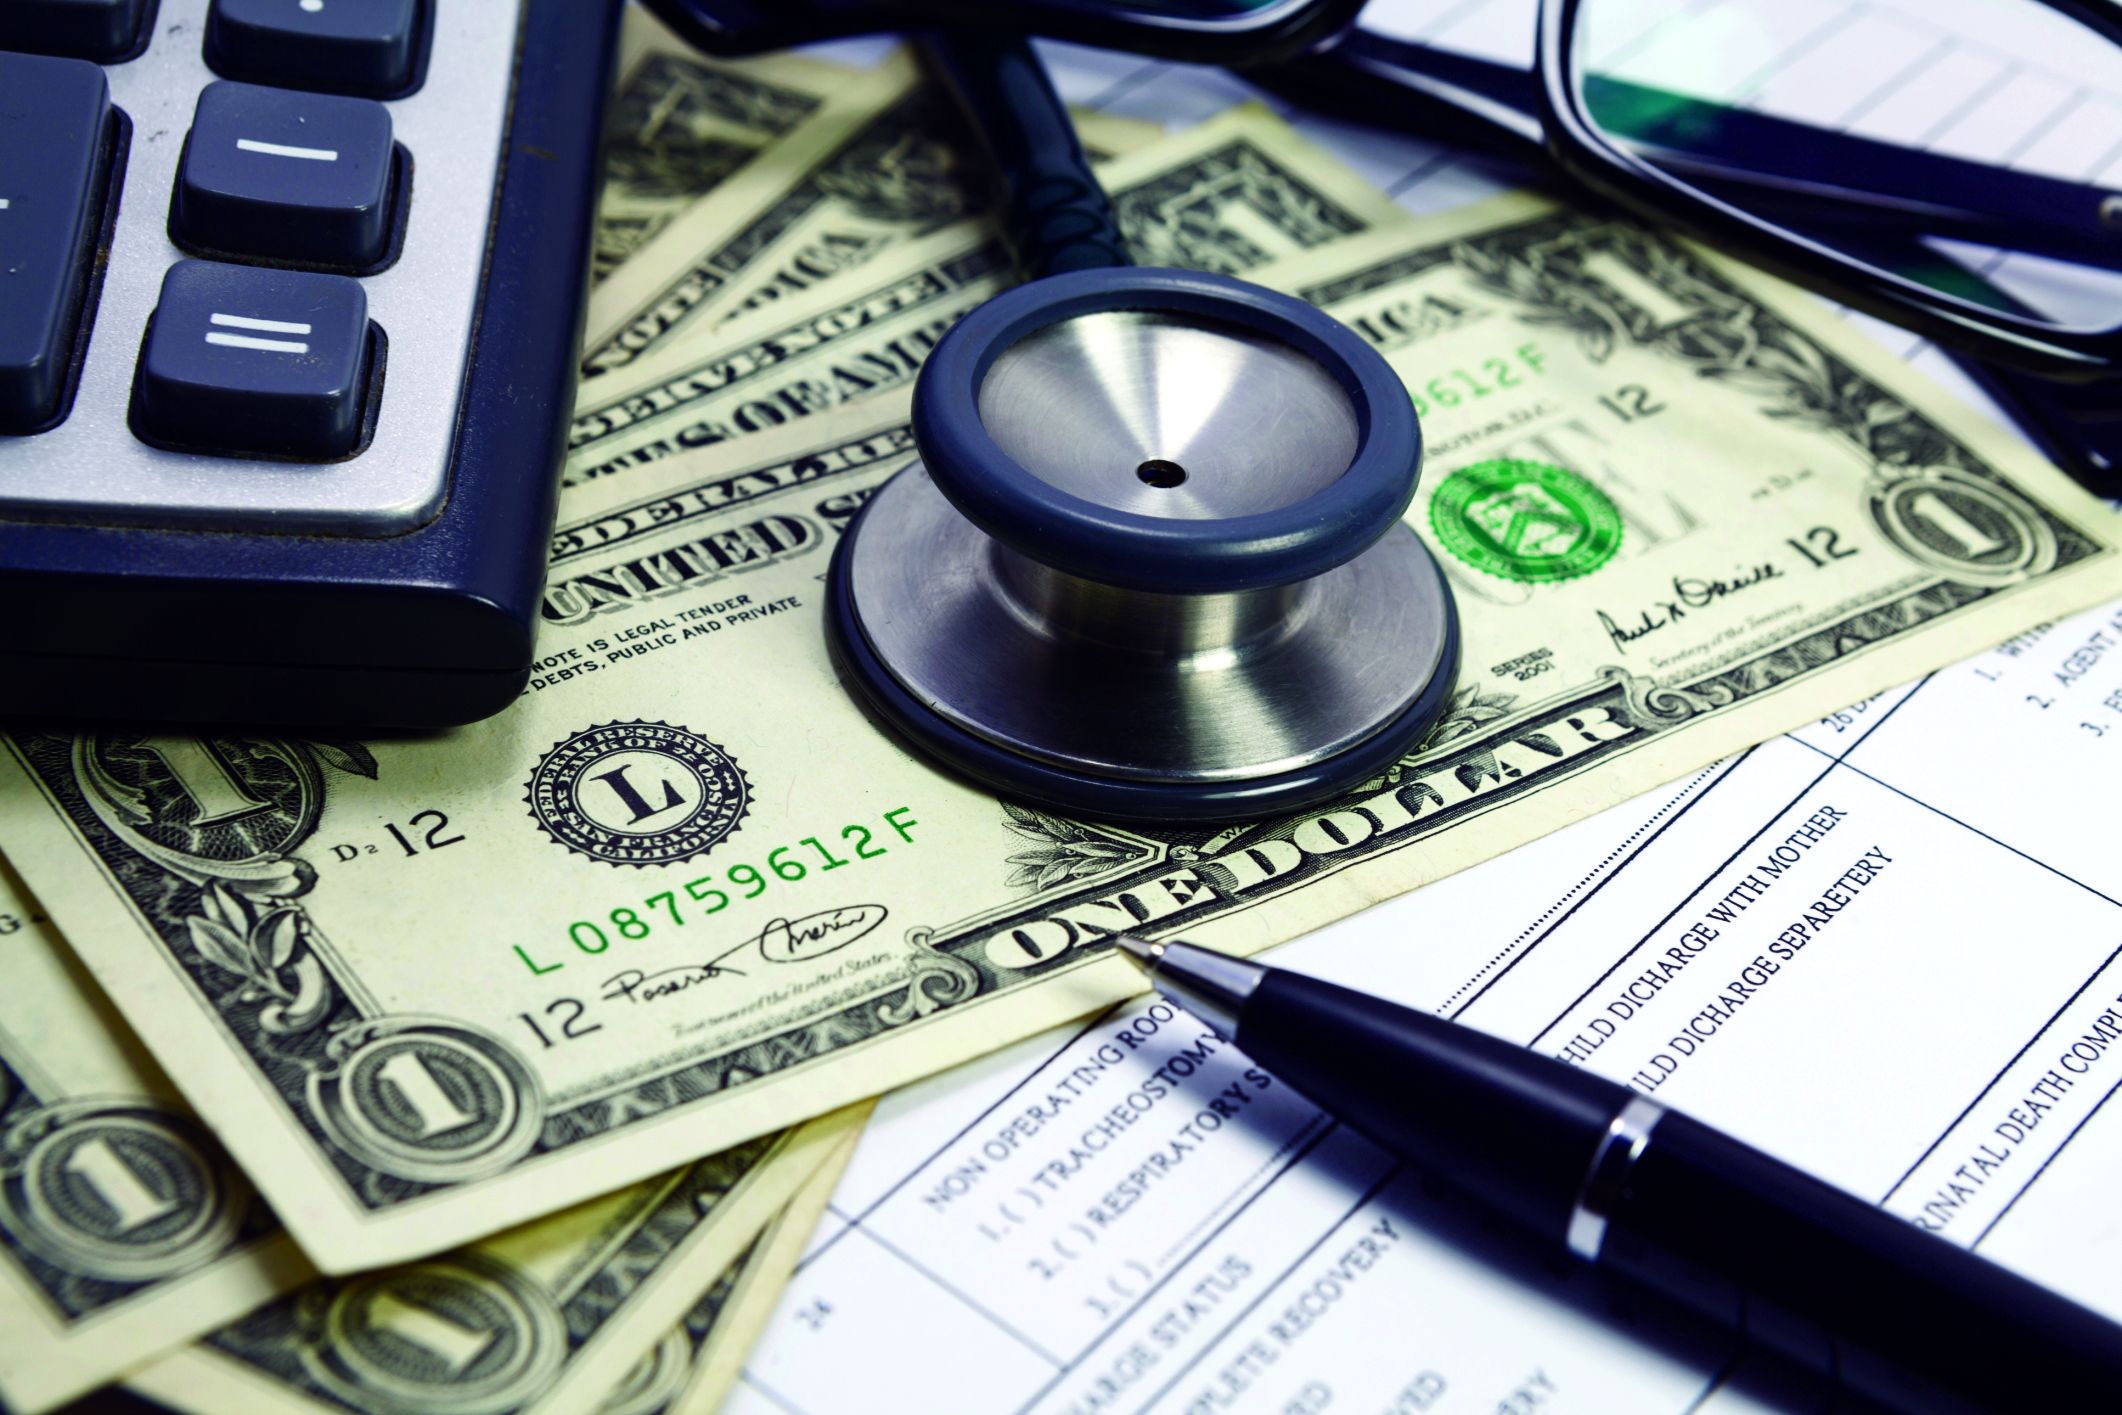 How to Prepare For Medicare Auditing of Care Management Programs